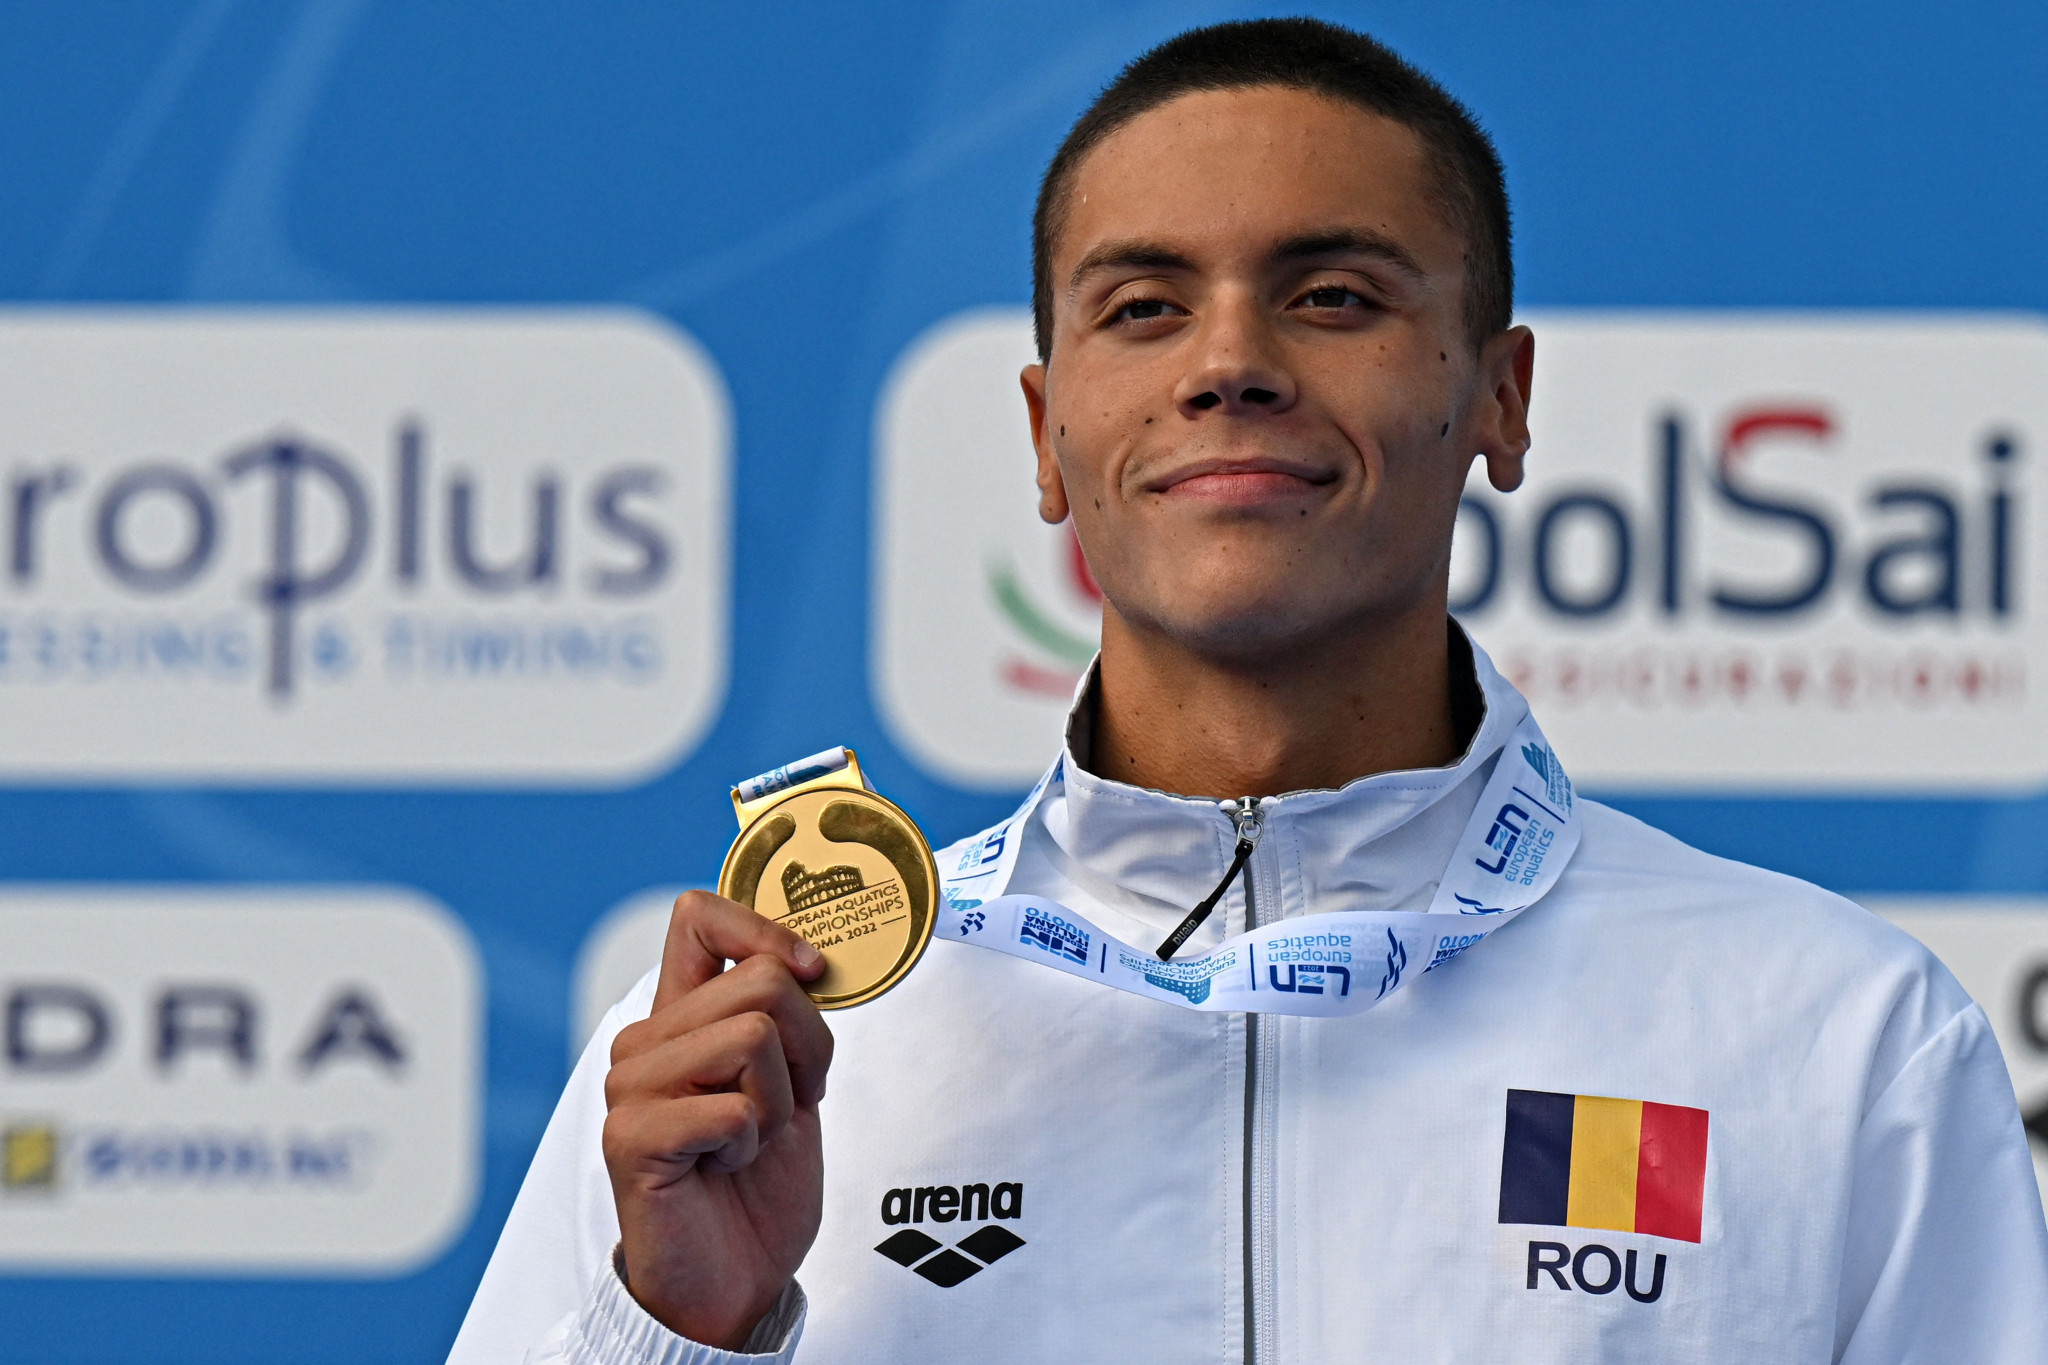 David Popovici became a double European champion today in Rome ©Getty Images